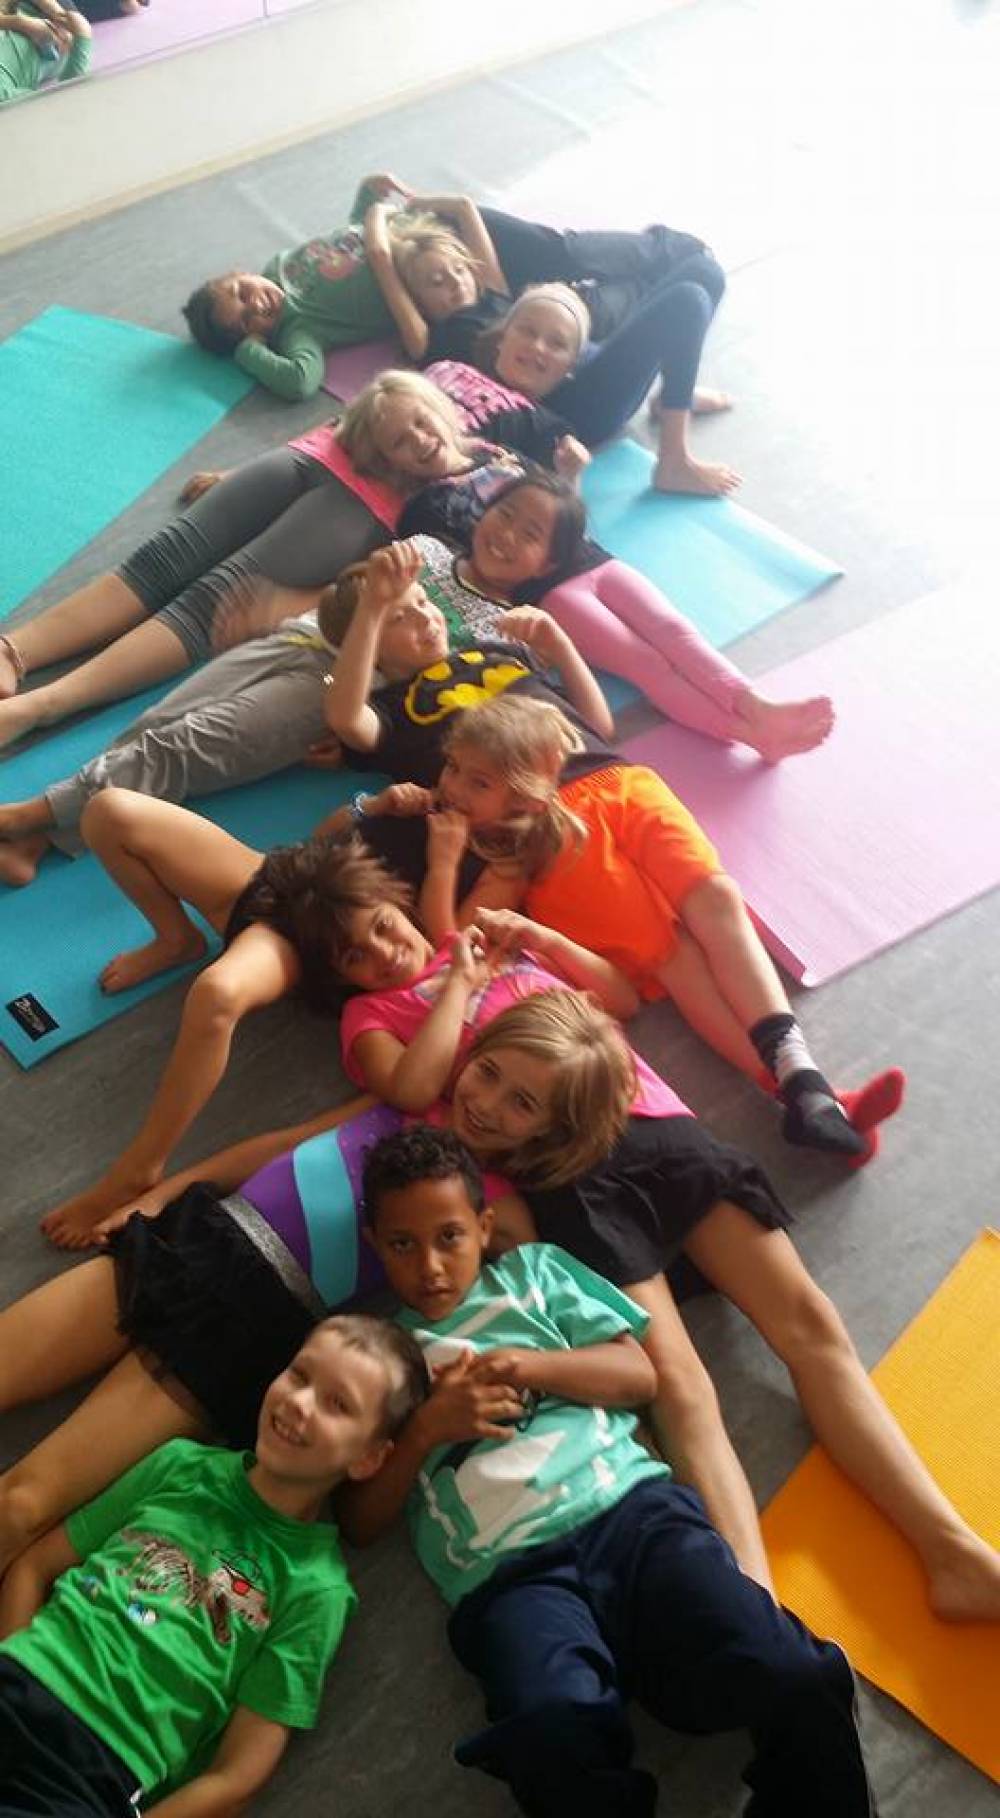 TOP MINNESOTA GYMNASTICS CAMP: Camp JUST DANCE at Dance-N-Magic is a Top Gymnastics Summer Camp located in St. Paul Minnesota offering many fun and enriching Gymnastics and other camp programs. 